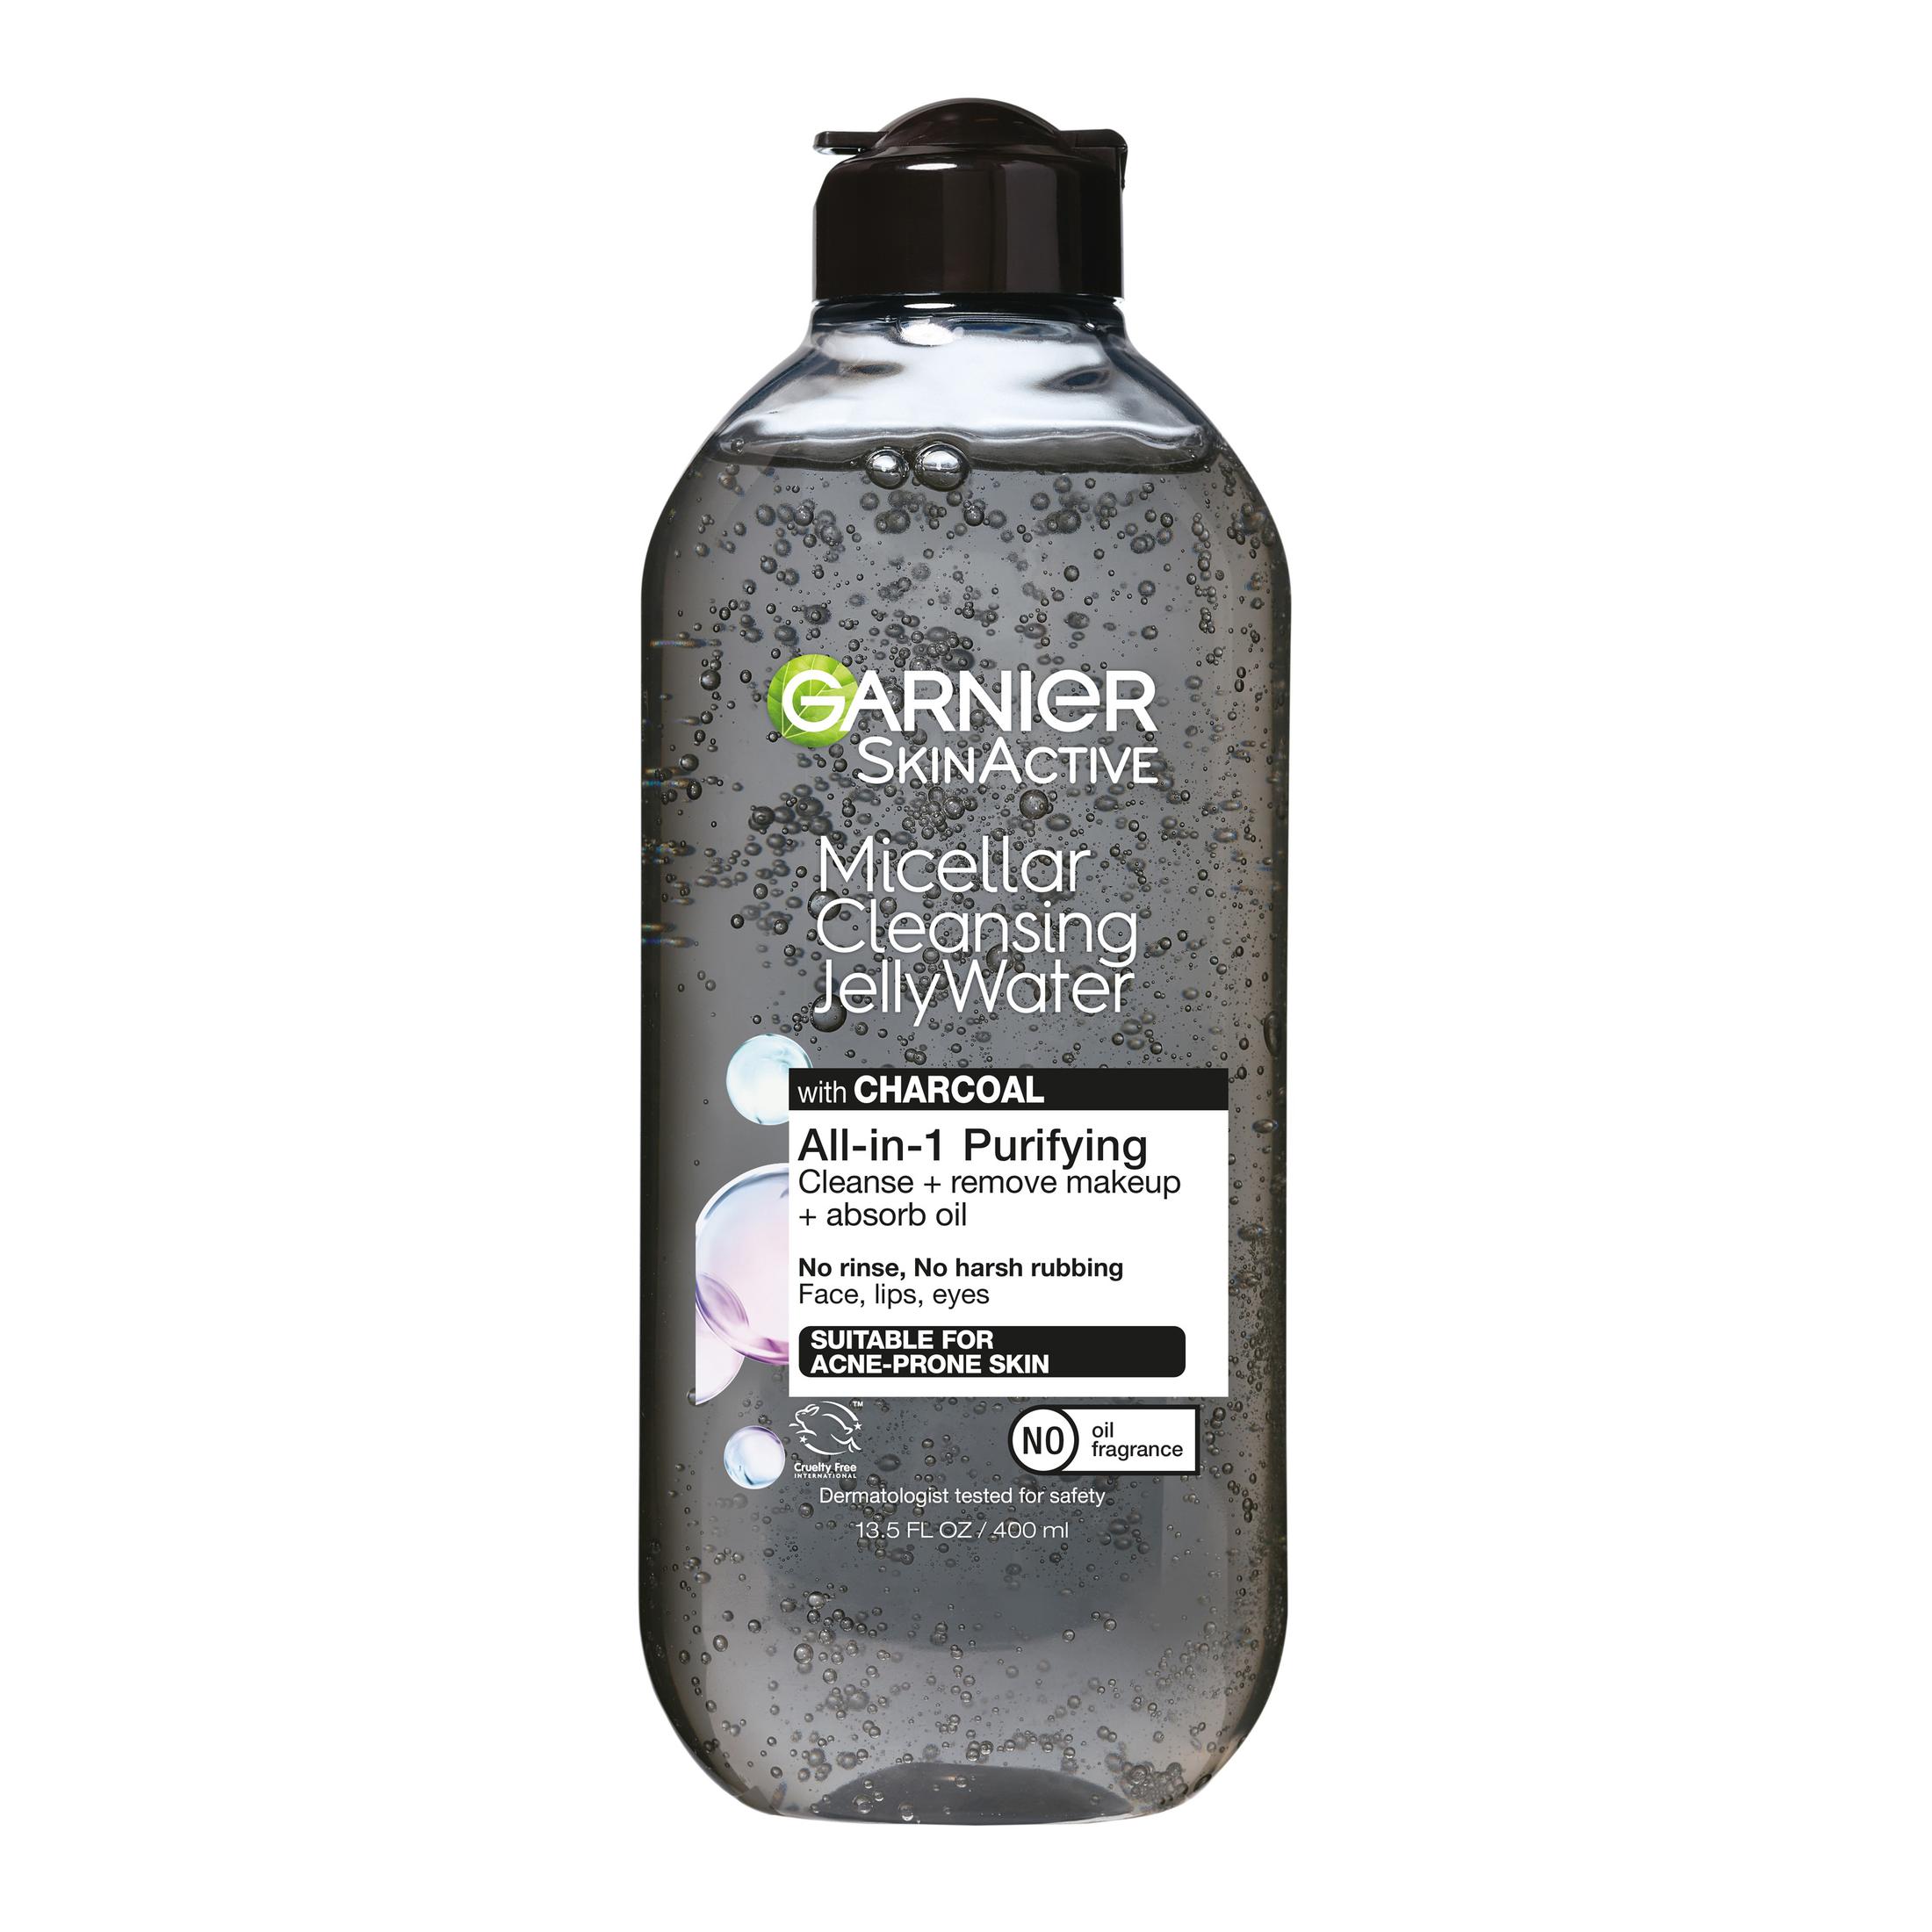 Garnier SkinActive Micellar Cleansing Jelly Water All in 1 Purifying, 13.5 fl oz - image 1 of 8